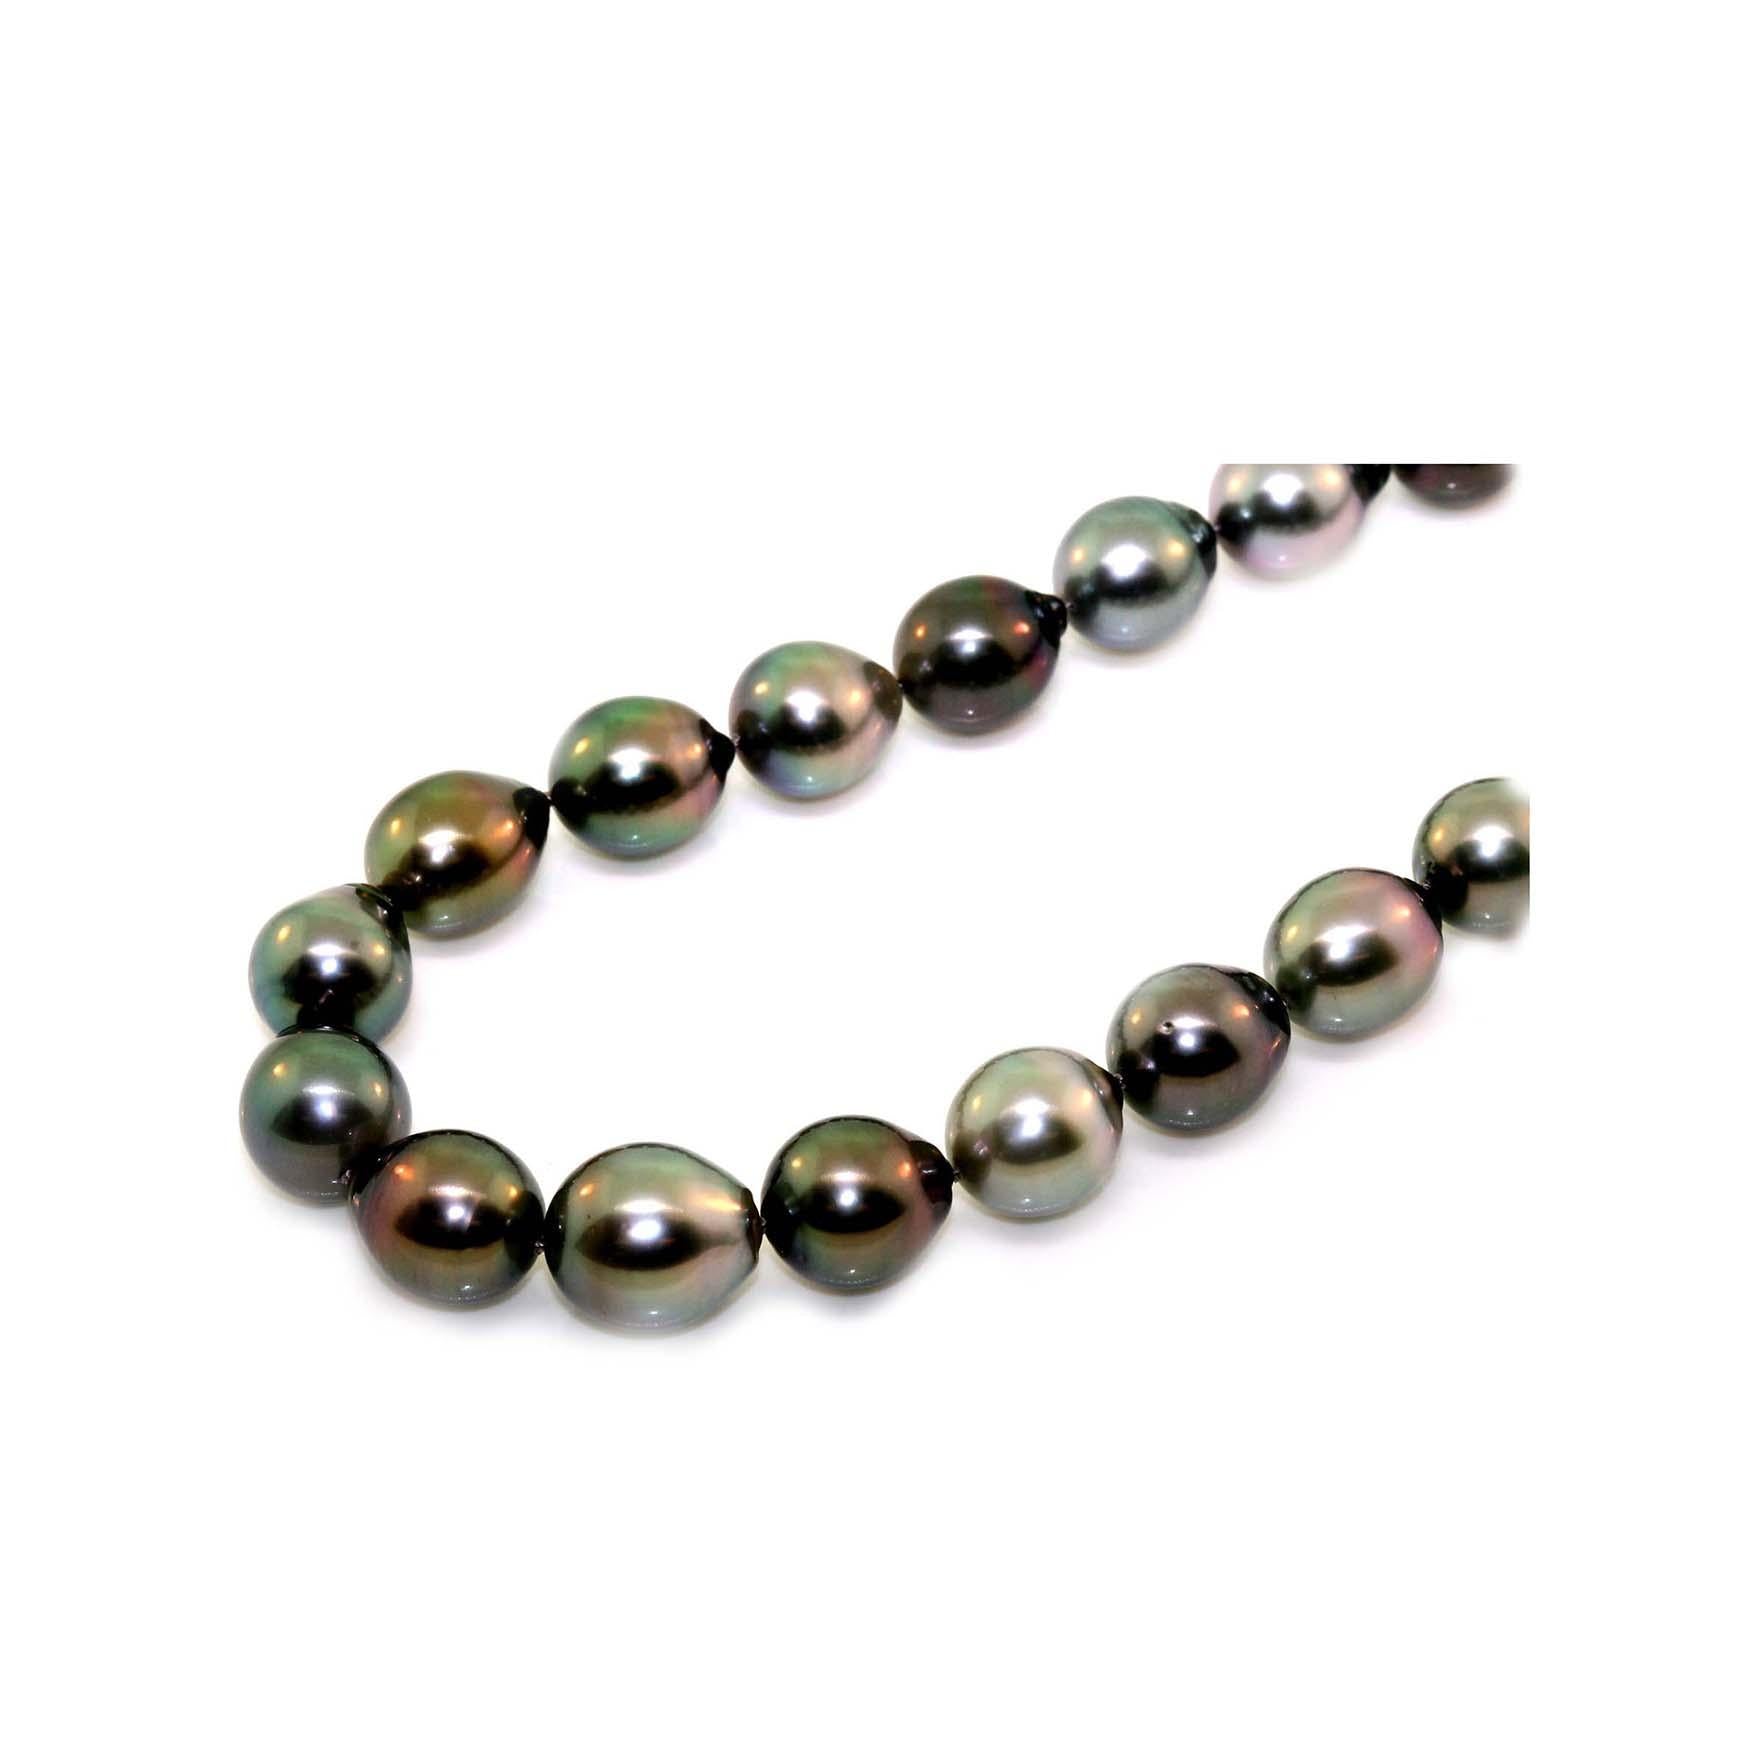 14 kt. White gold - Necklace - 8.3x11.6mm Shimmering Multi Tahitian Pearls  - Catawiki